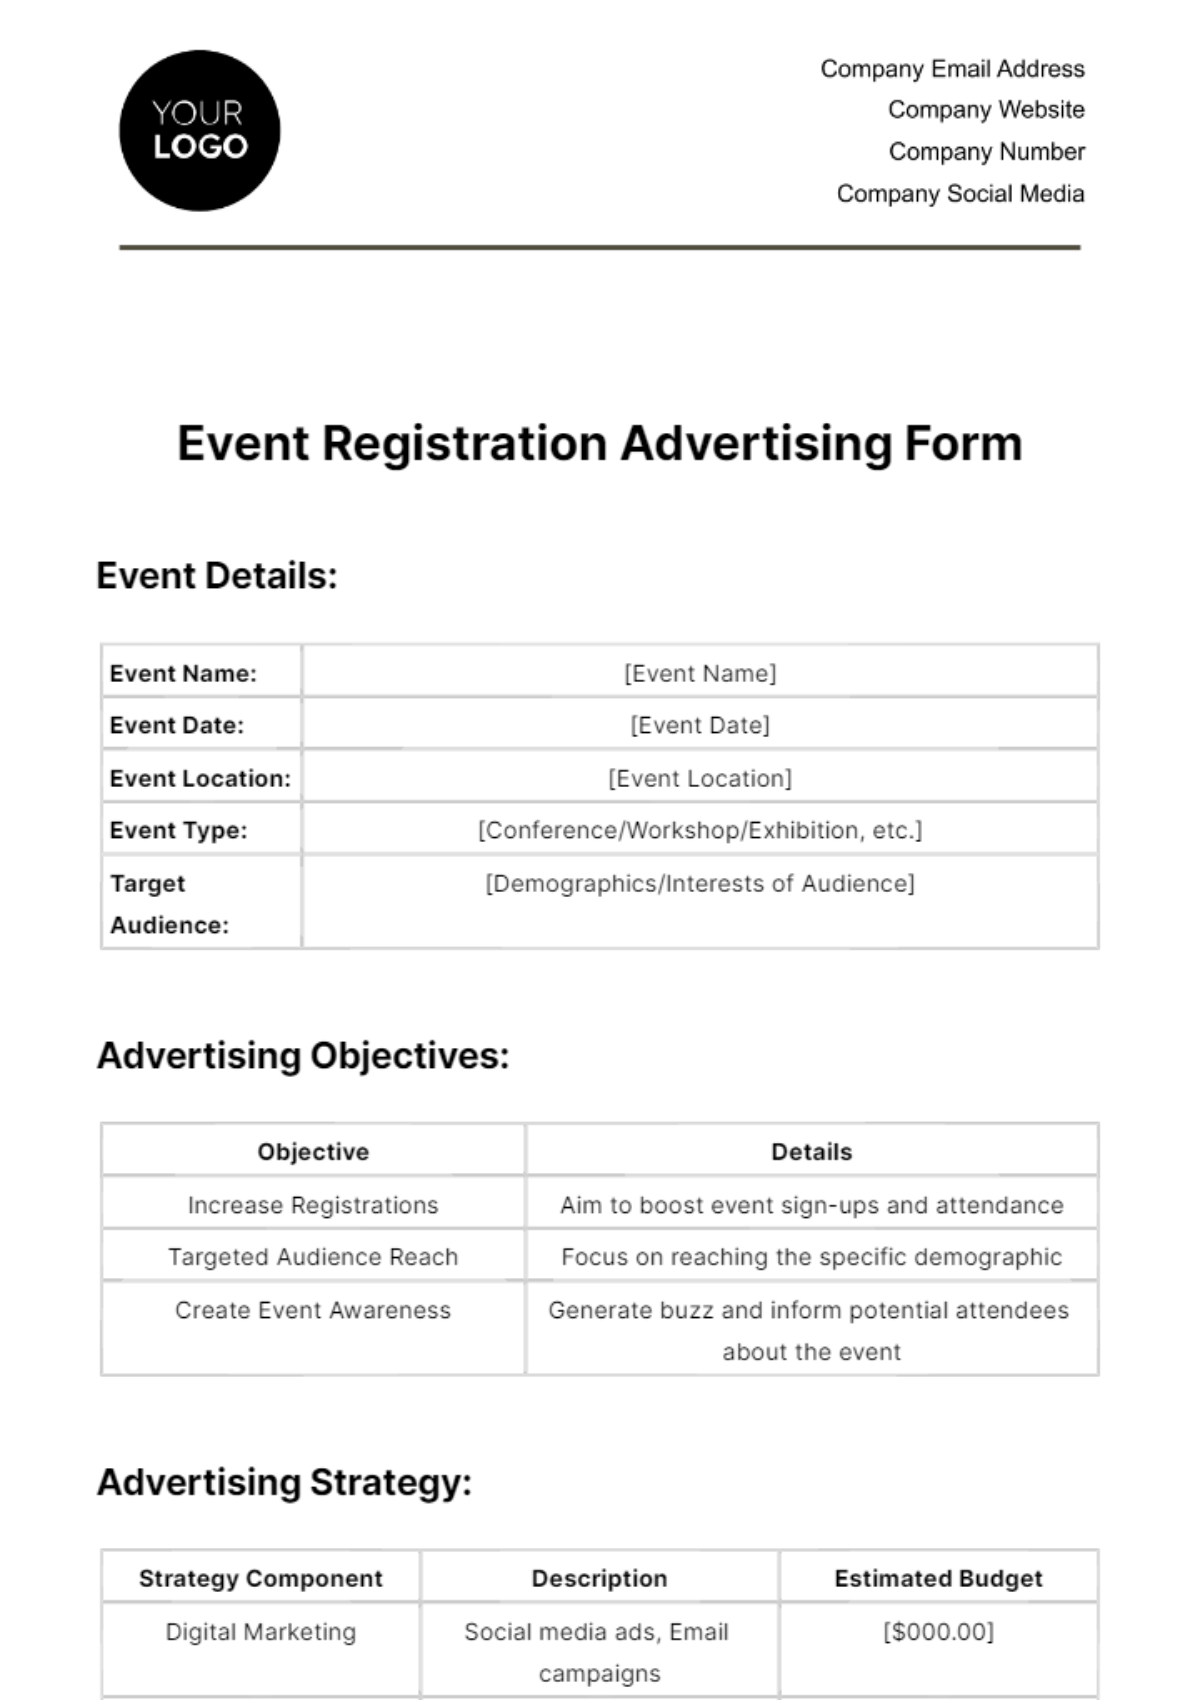 Free Event Registration Advertising Form Template